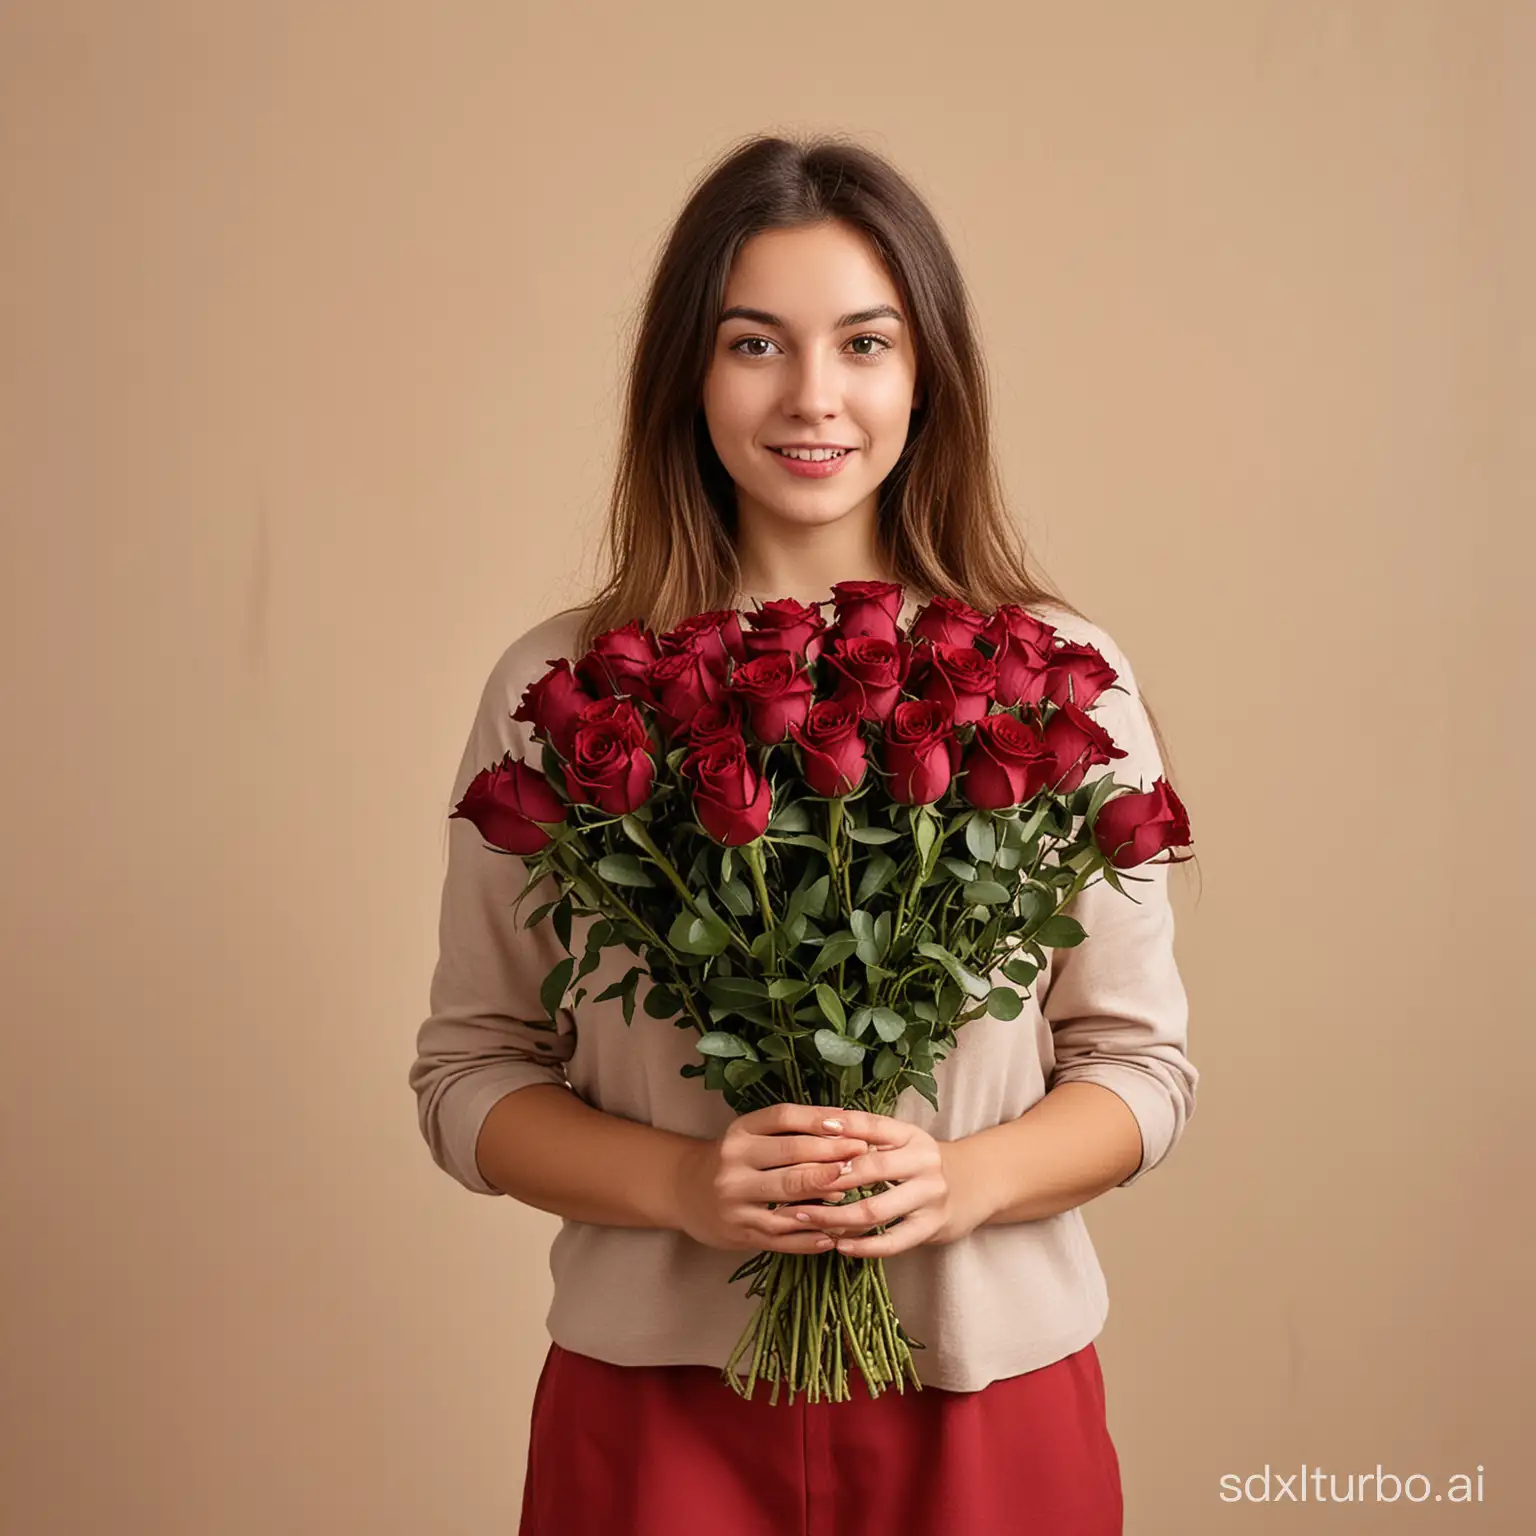 Girl-Holding-101-Burgundy-Roses-Against-OliveColored-Wall